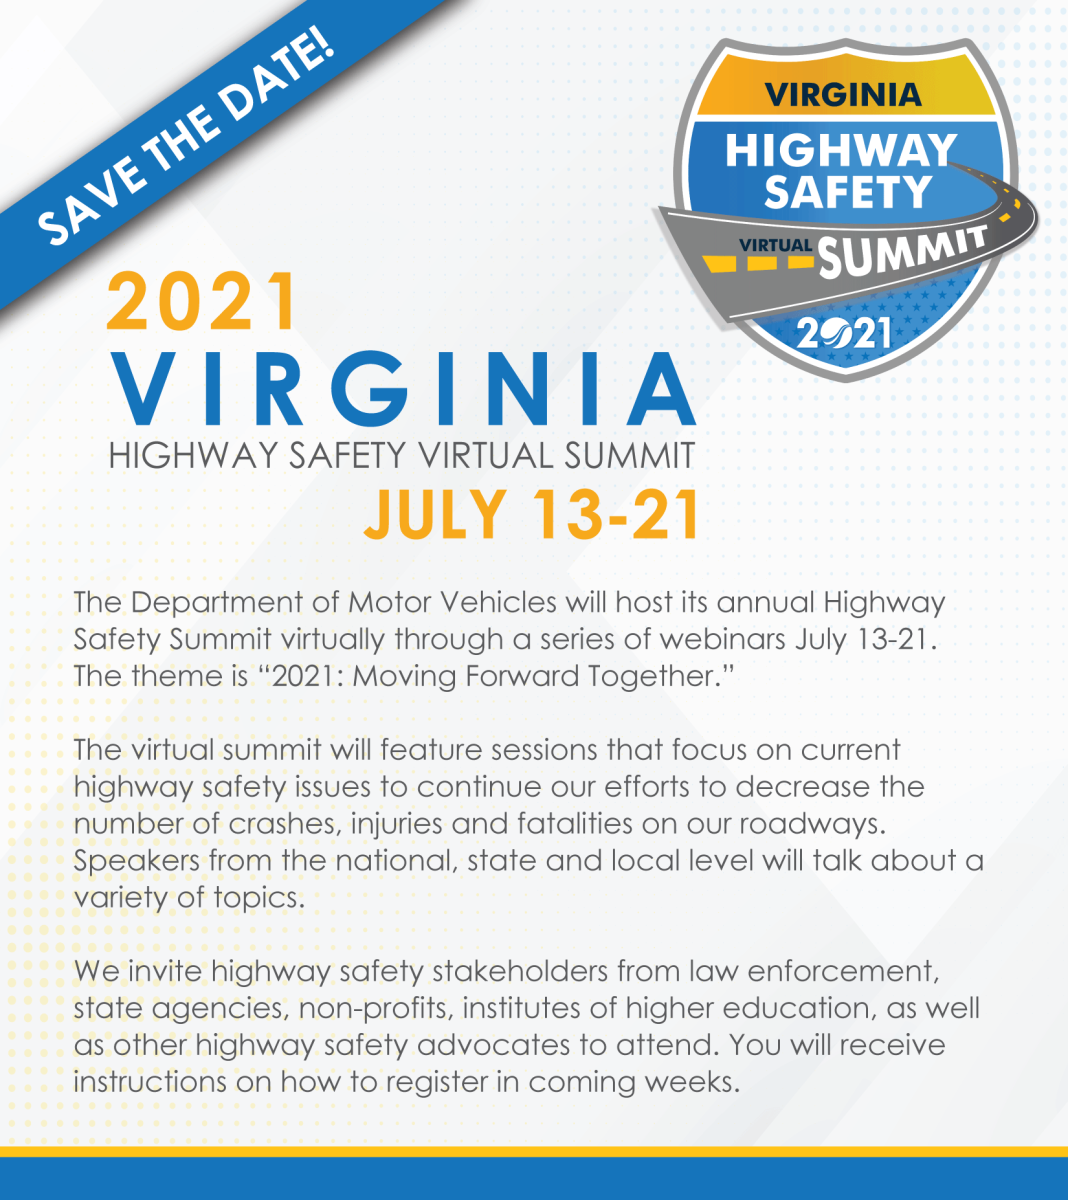 Save the date for the 2021 Virginia Highway Safety Virtual Summit from July 13 to 21.